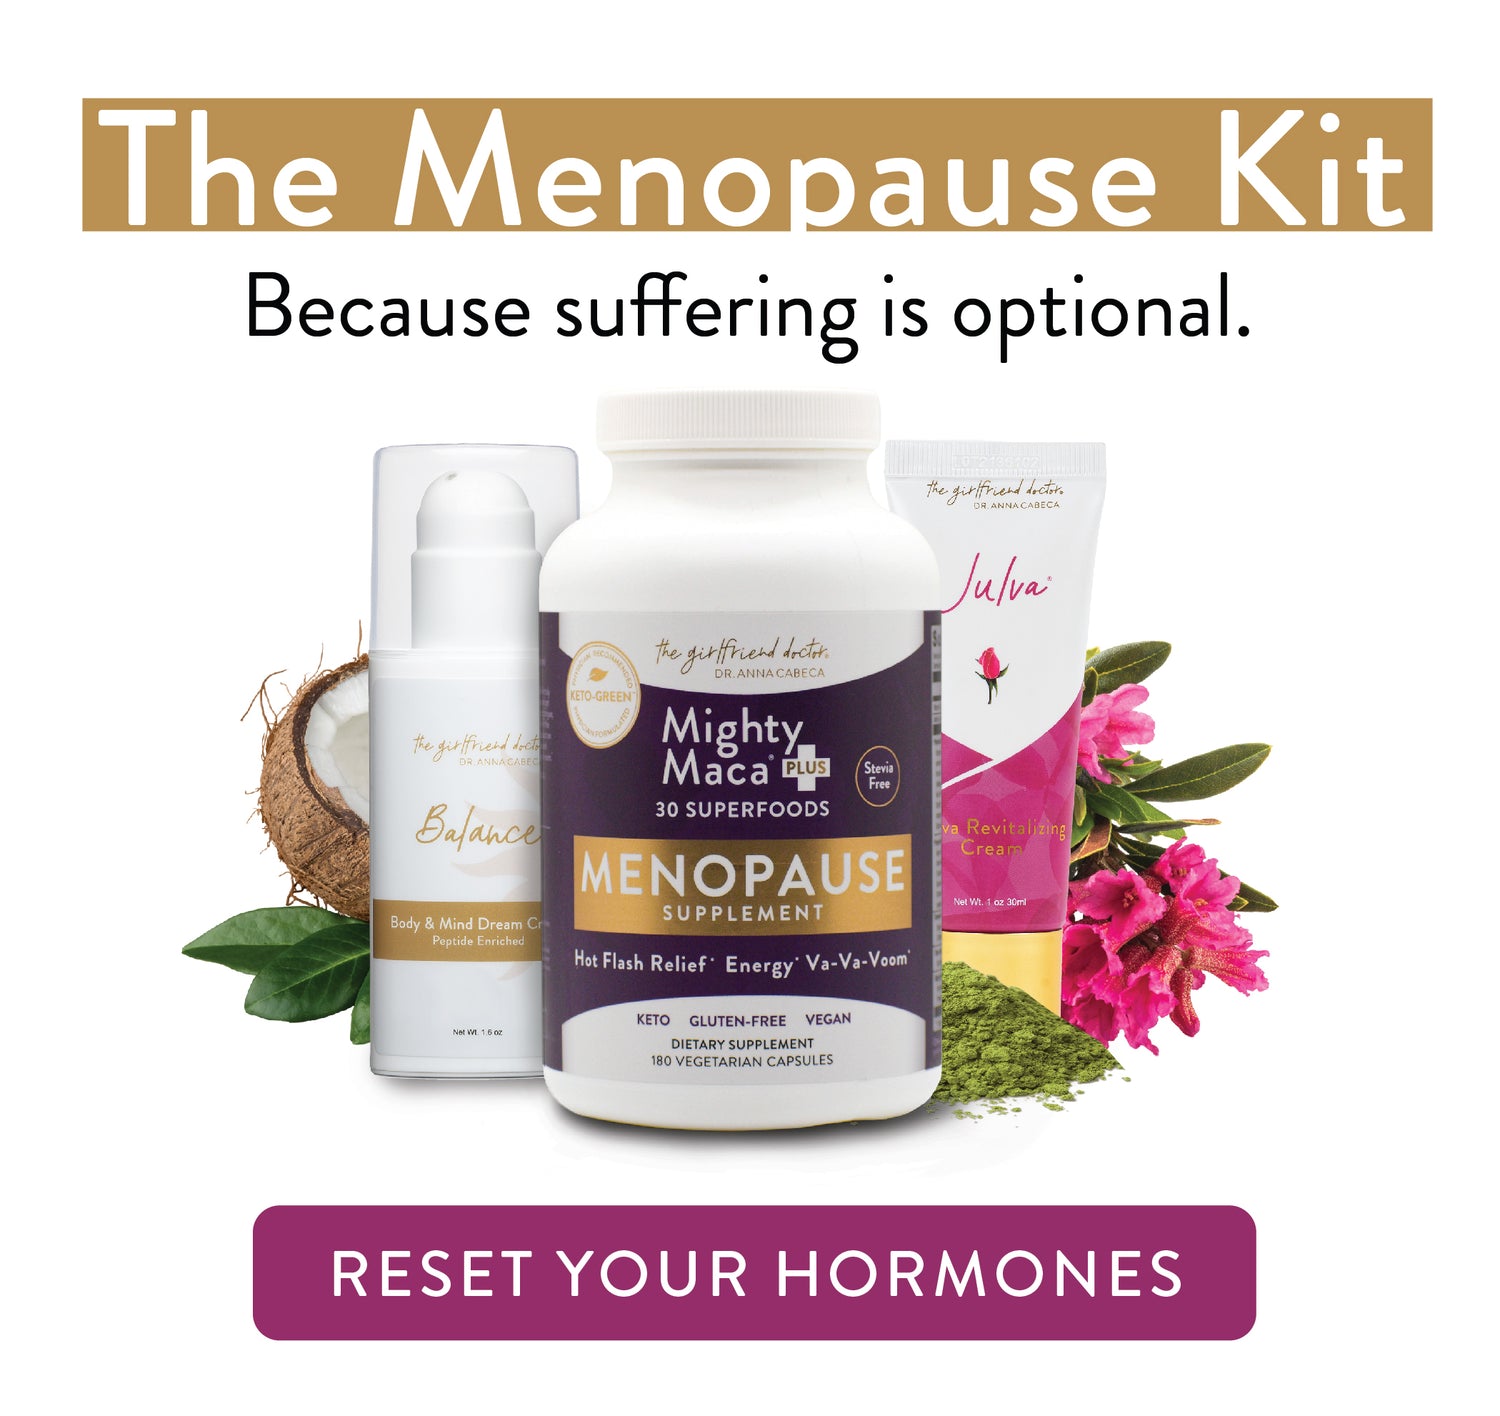 The Menopause Kit. Because suffering is optional. Reset your hormones